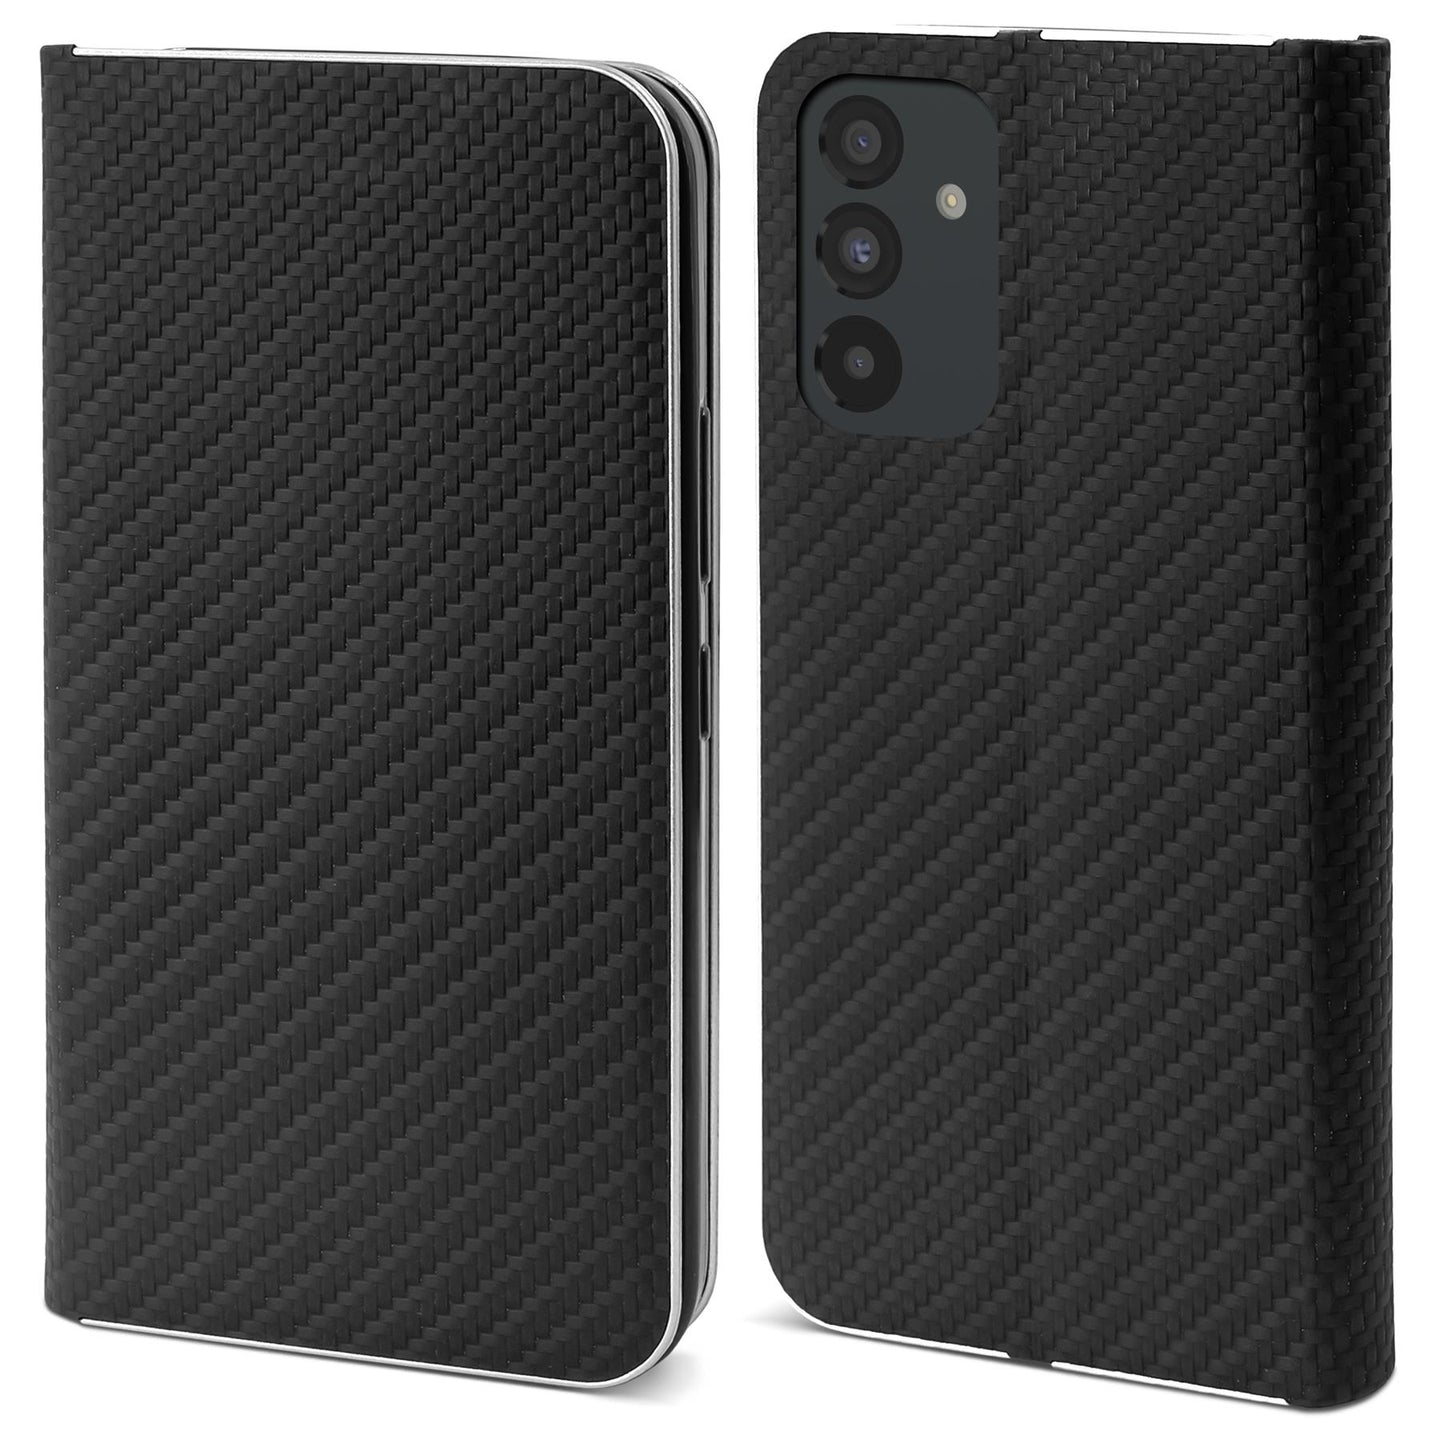 Moozy Wallet Case for Samsung A54 5G, Black Carbon - Flip Case with Metallic Border Design Magnetic Closure Flip Cover with Card Holder and Kickstand Function